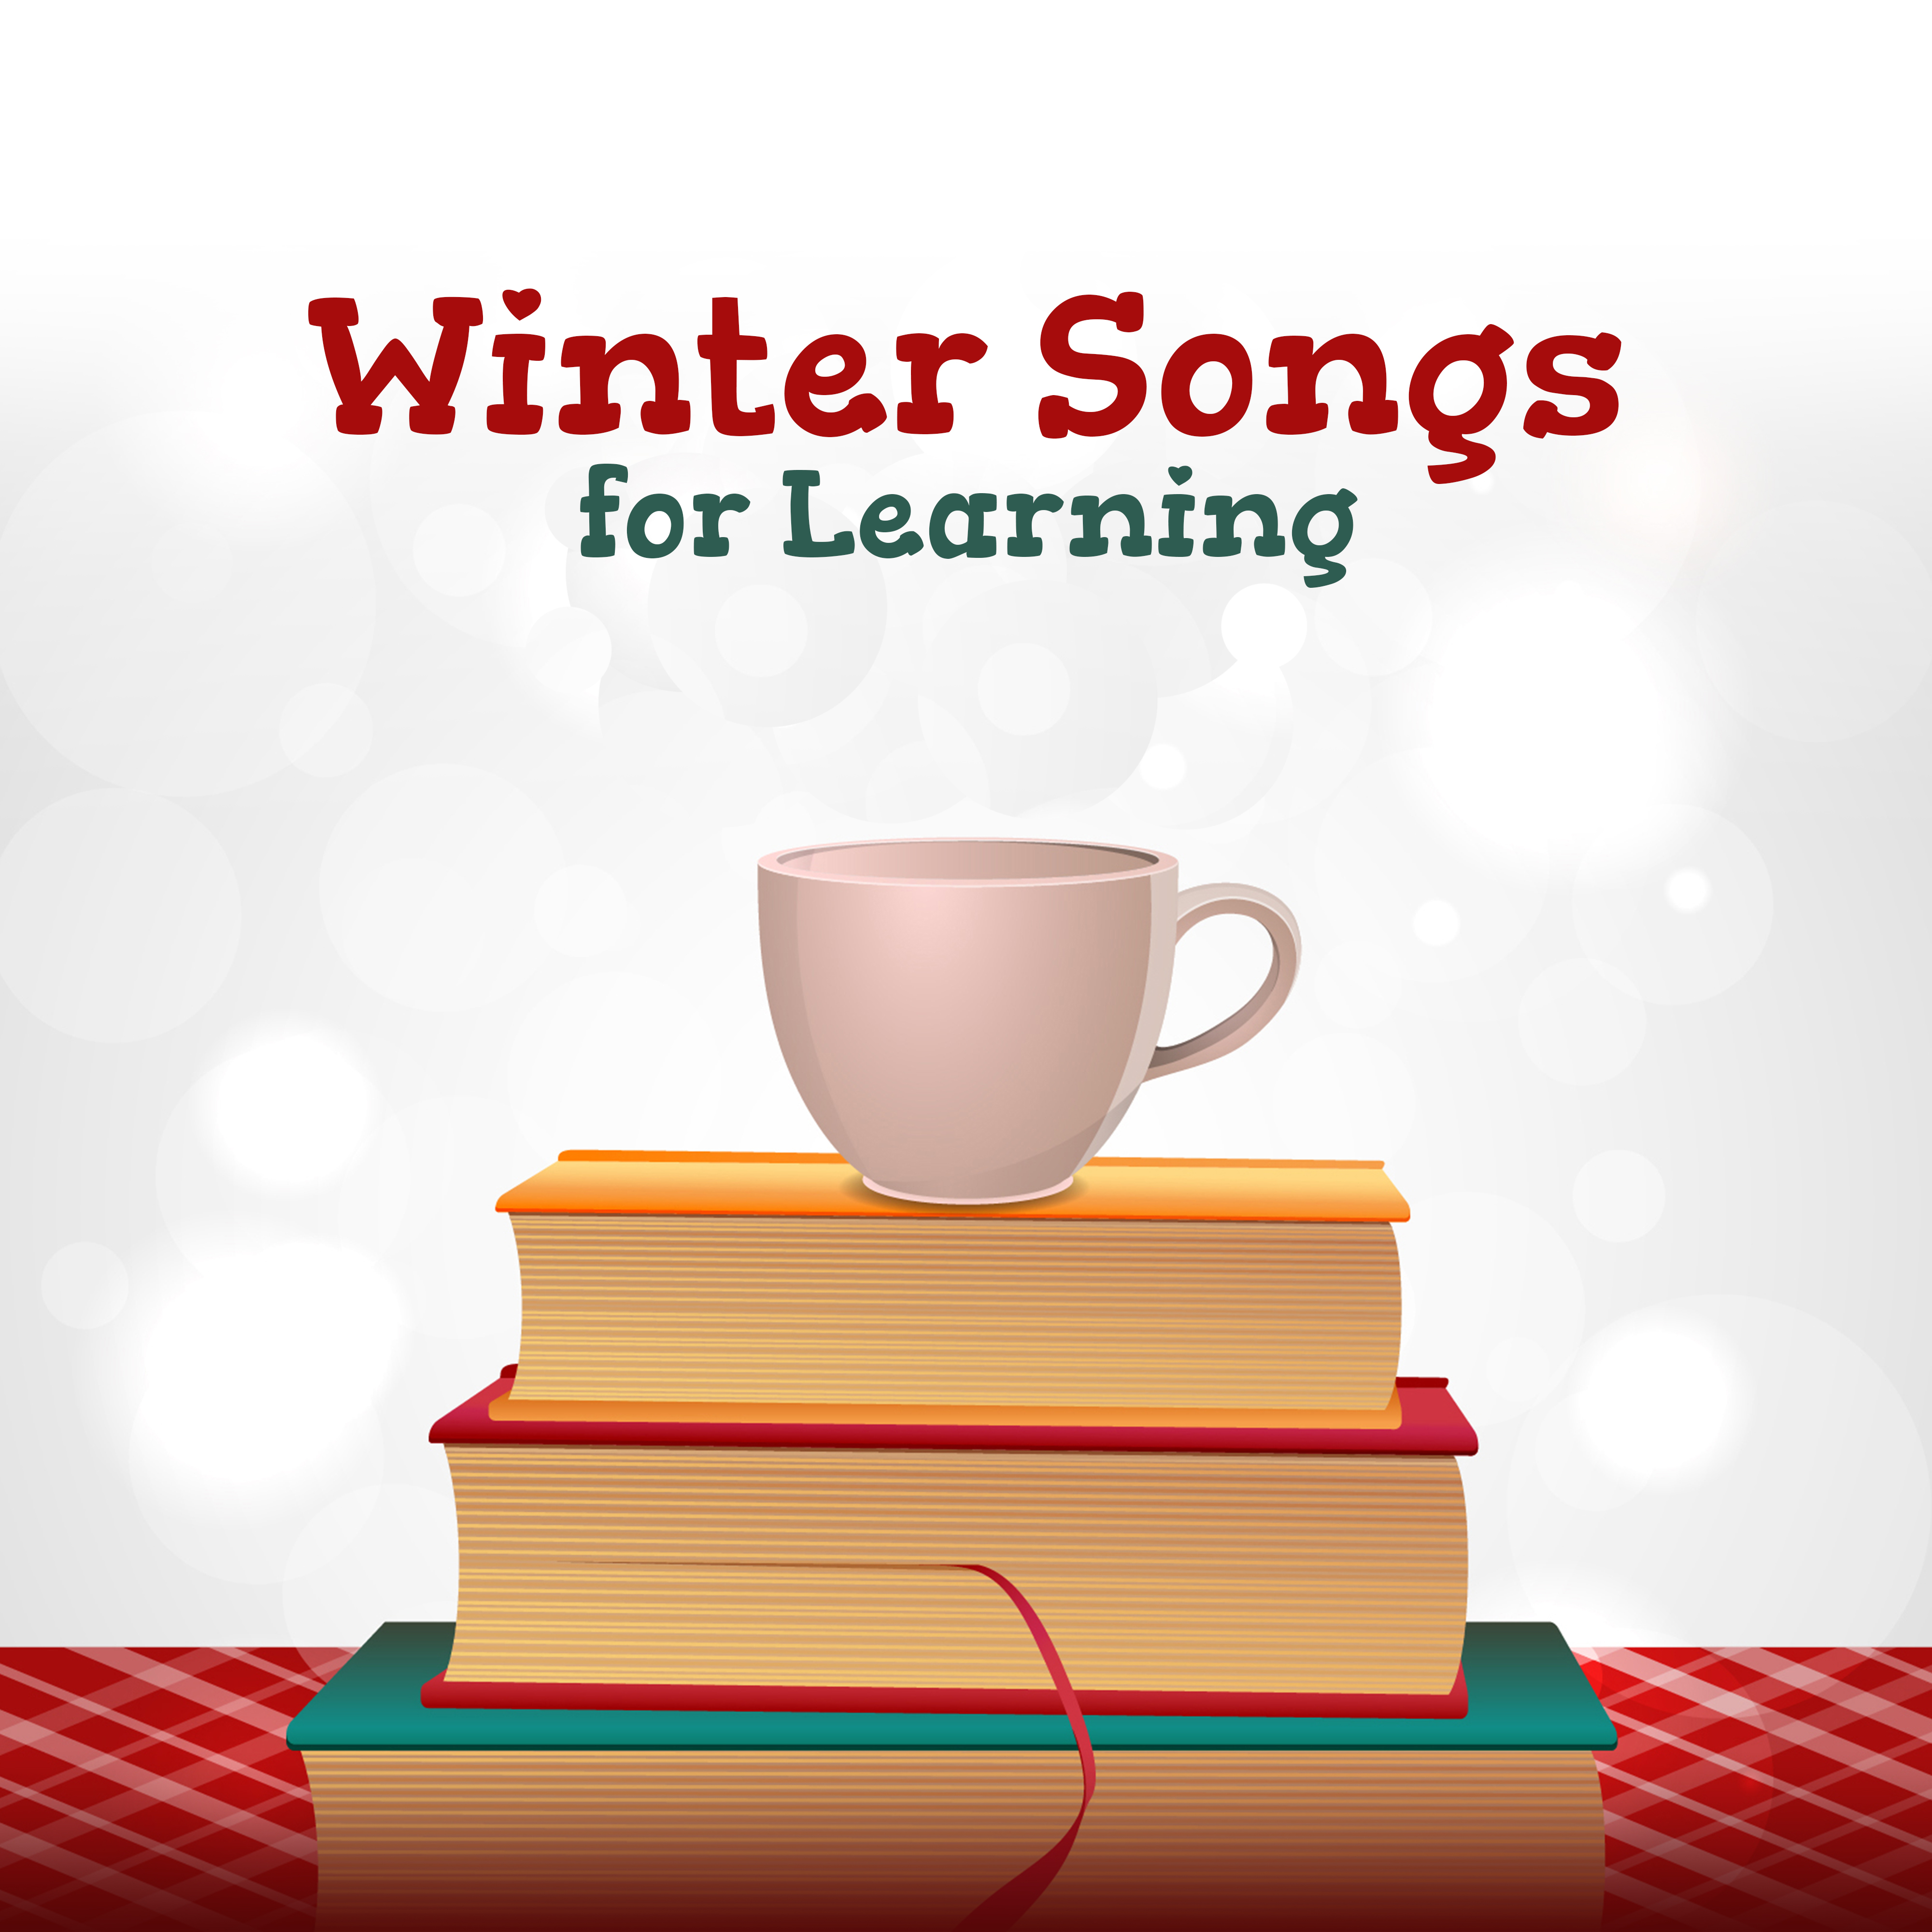 Winter Songs for Learning